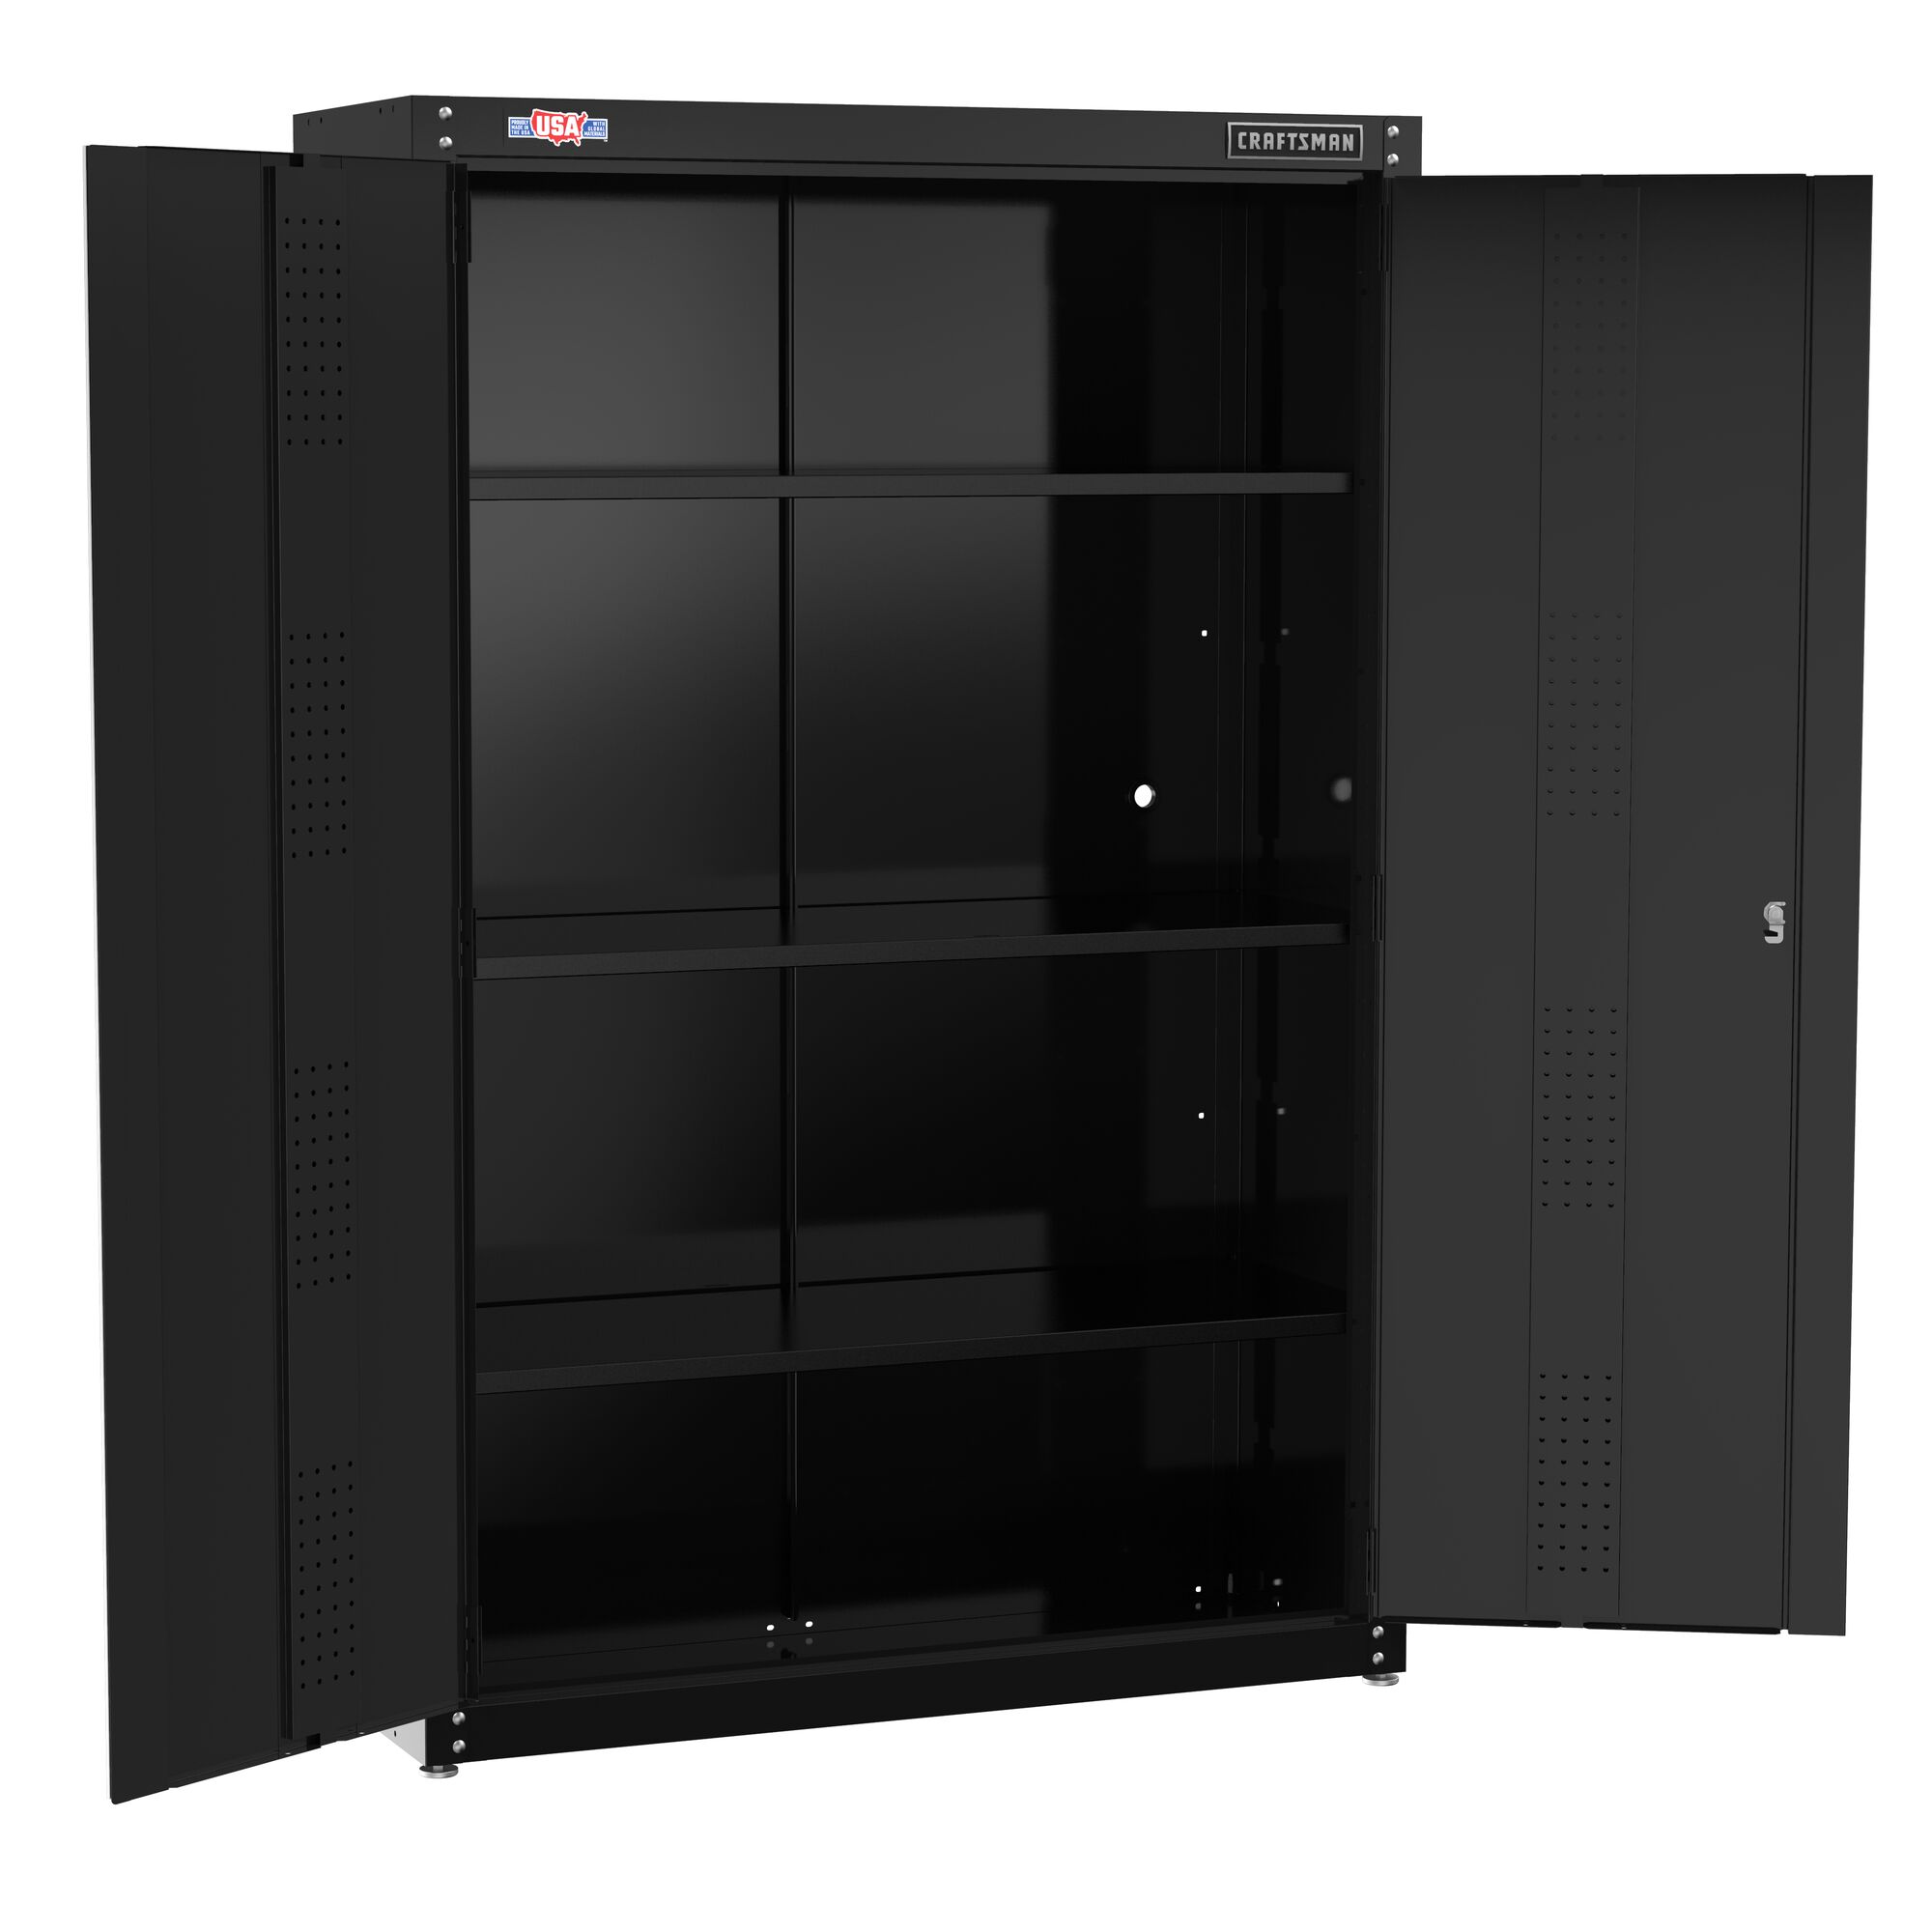 CRAFTSMAN 48-in wide storage cabinet angled view with doors open